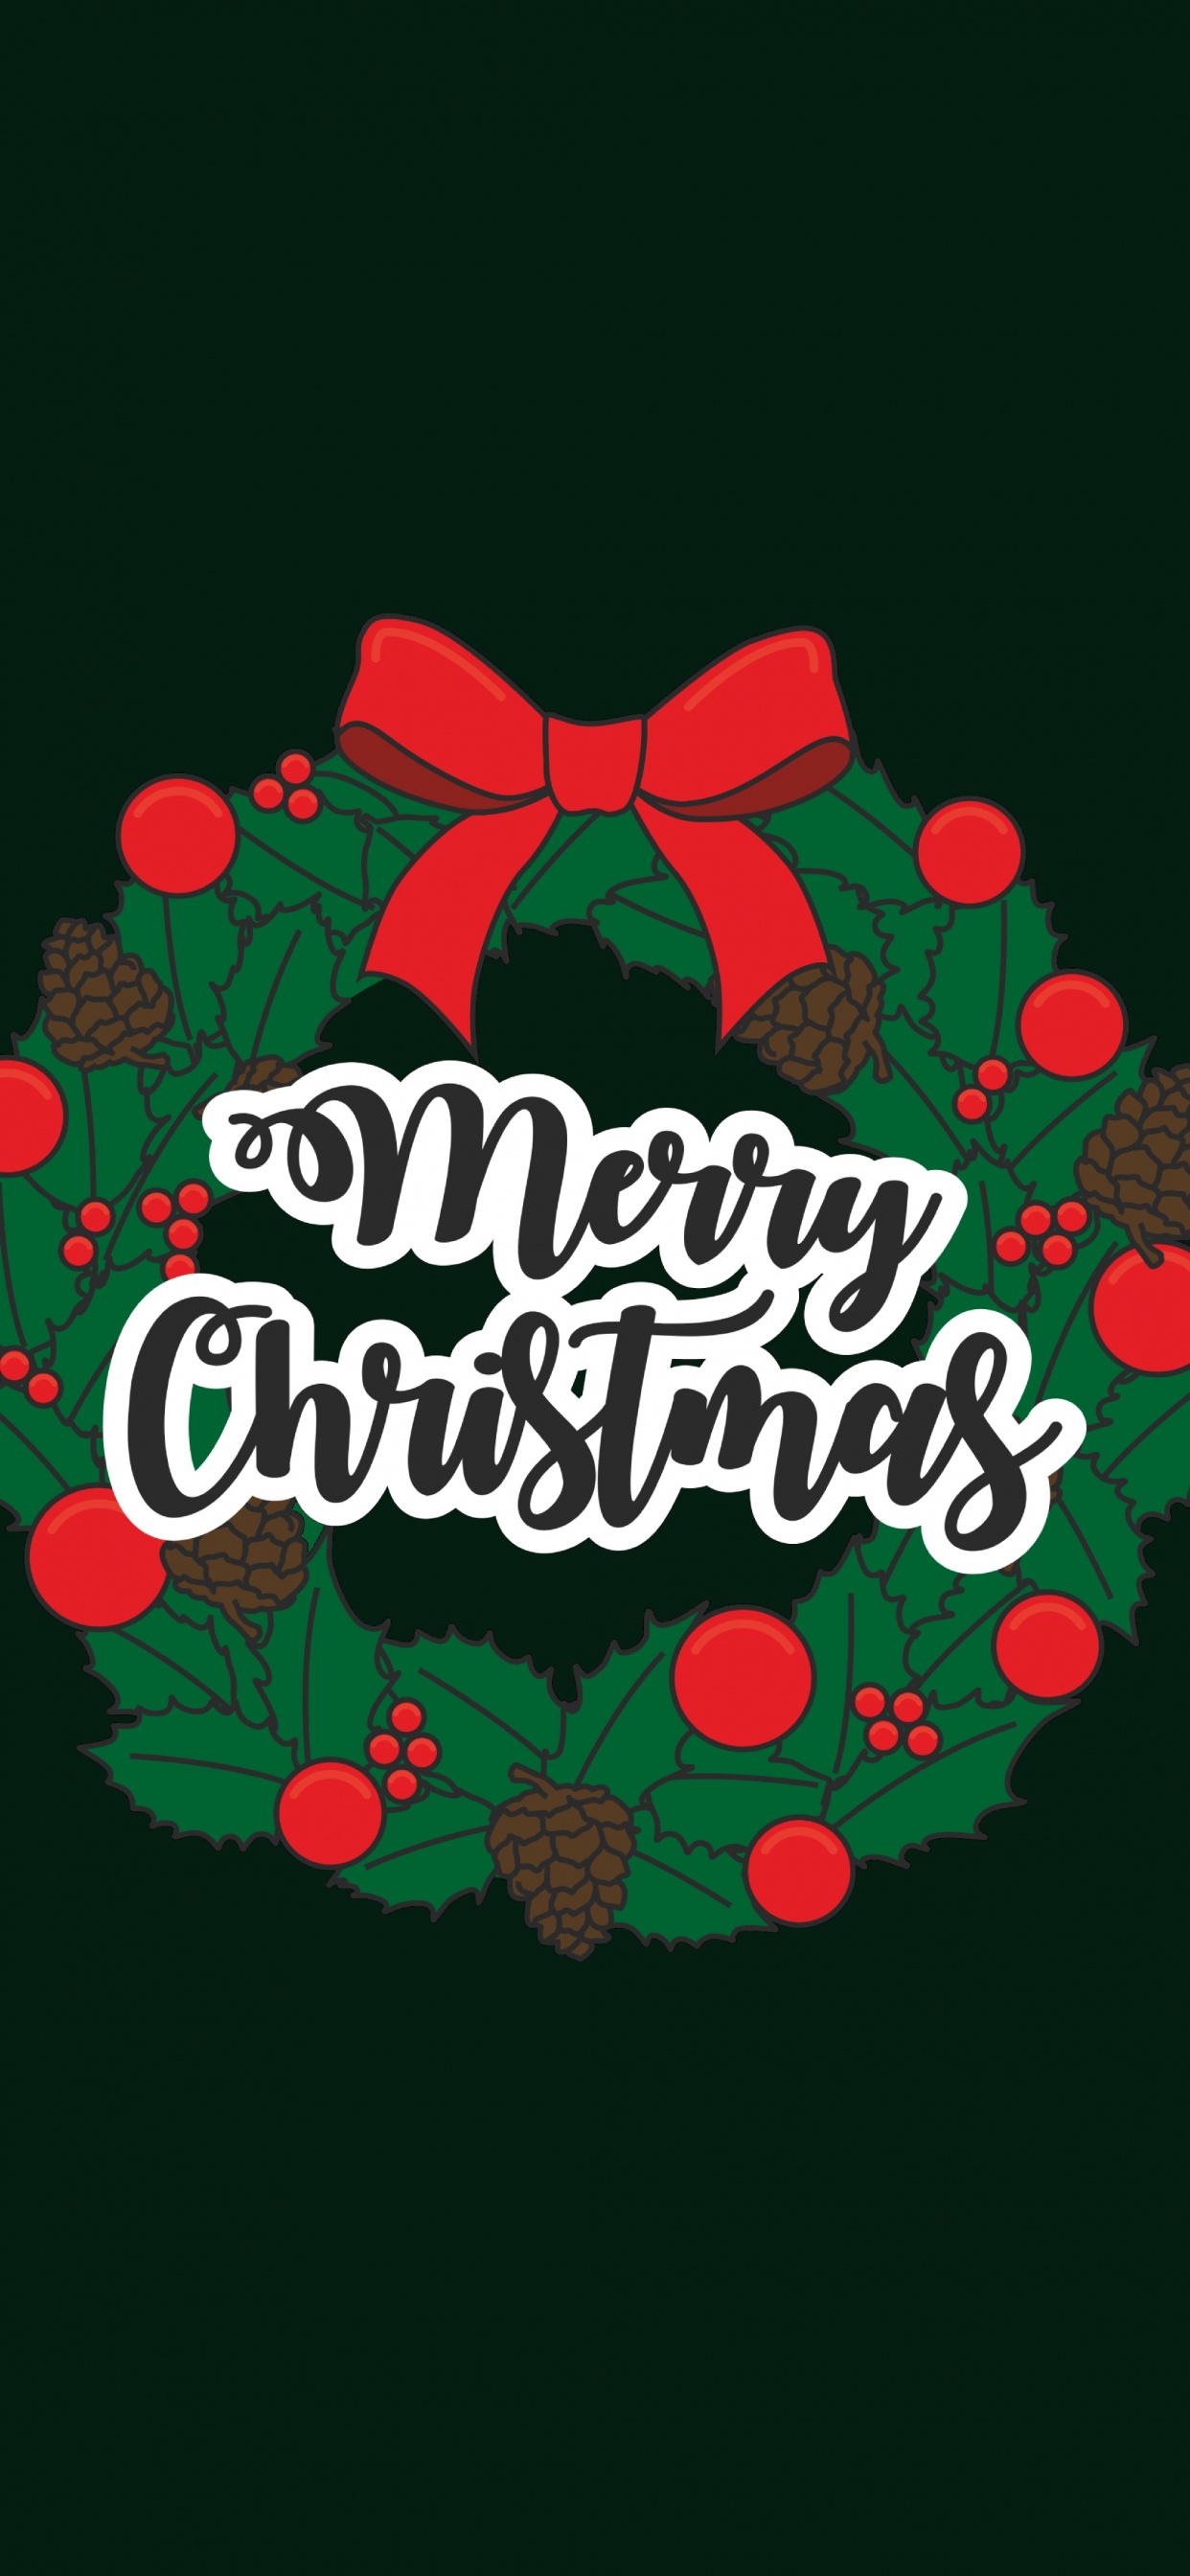 Christmas Day, Holiday, New Year, Logo, Illustration. Wallpaper in 1242x2688 Resolution